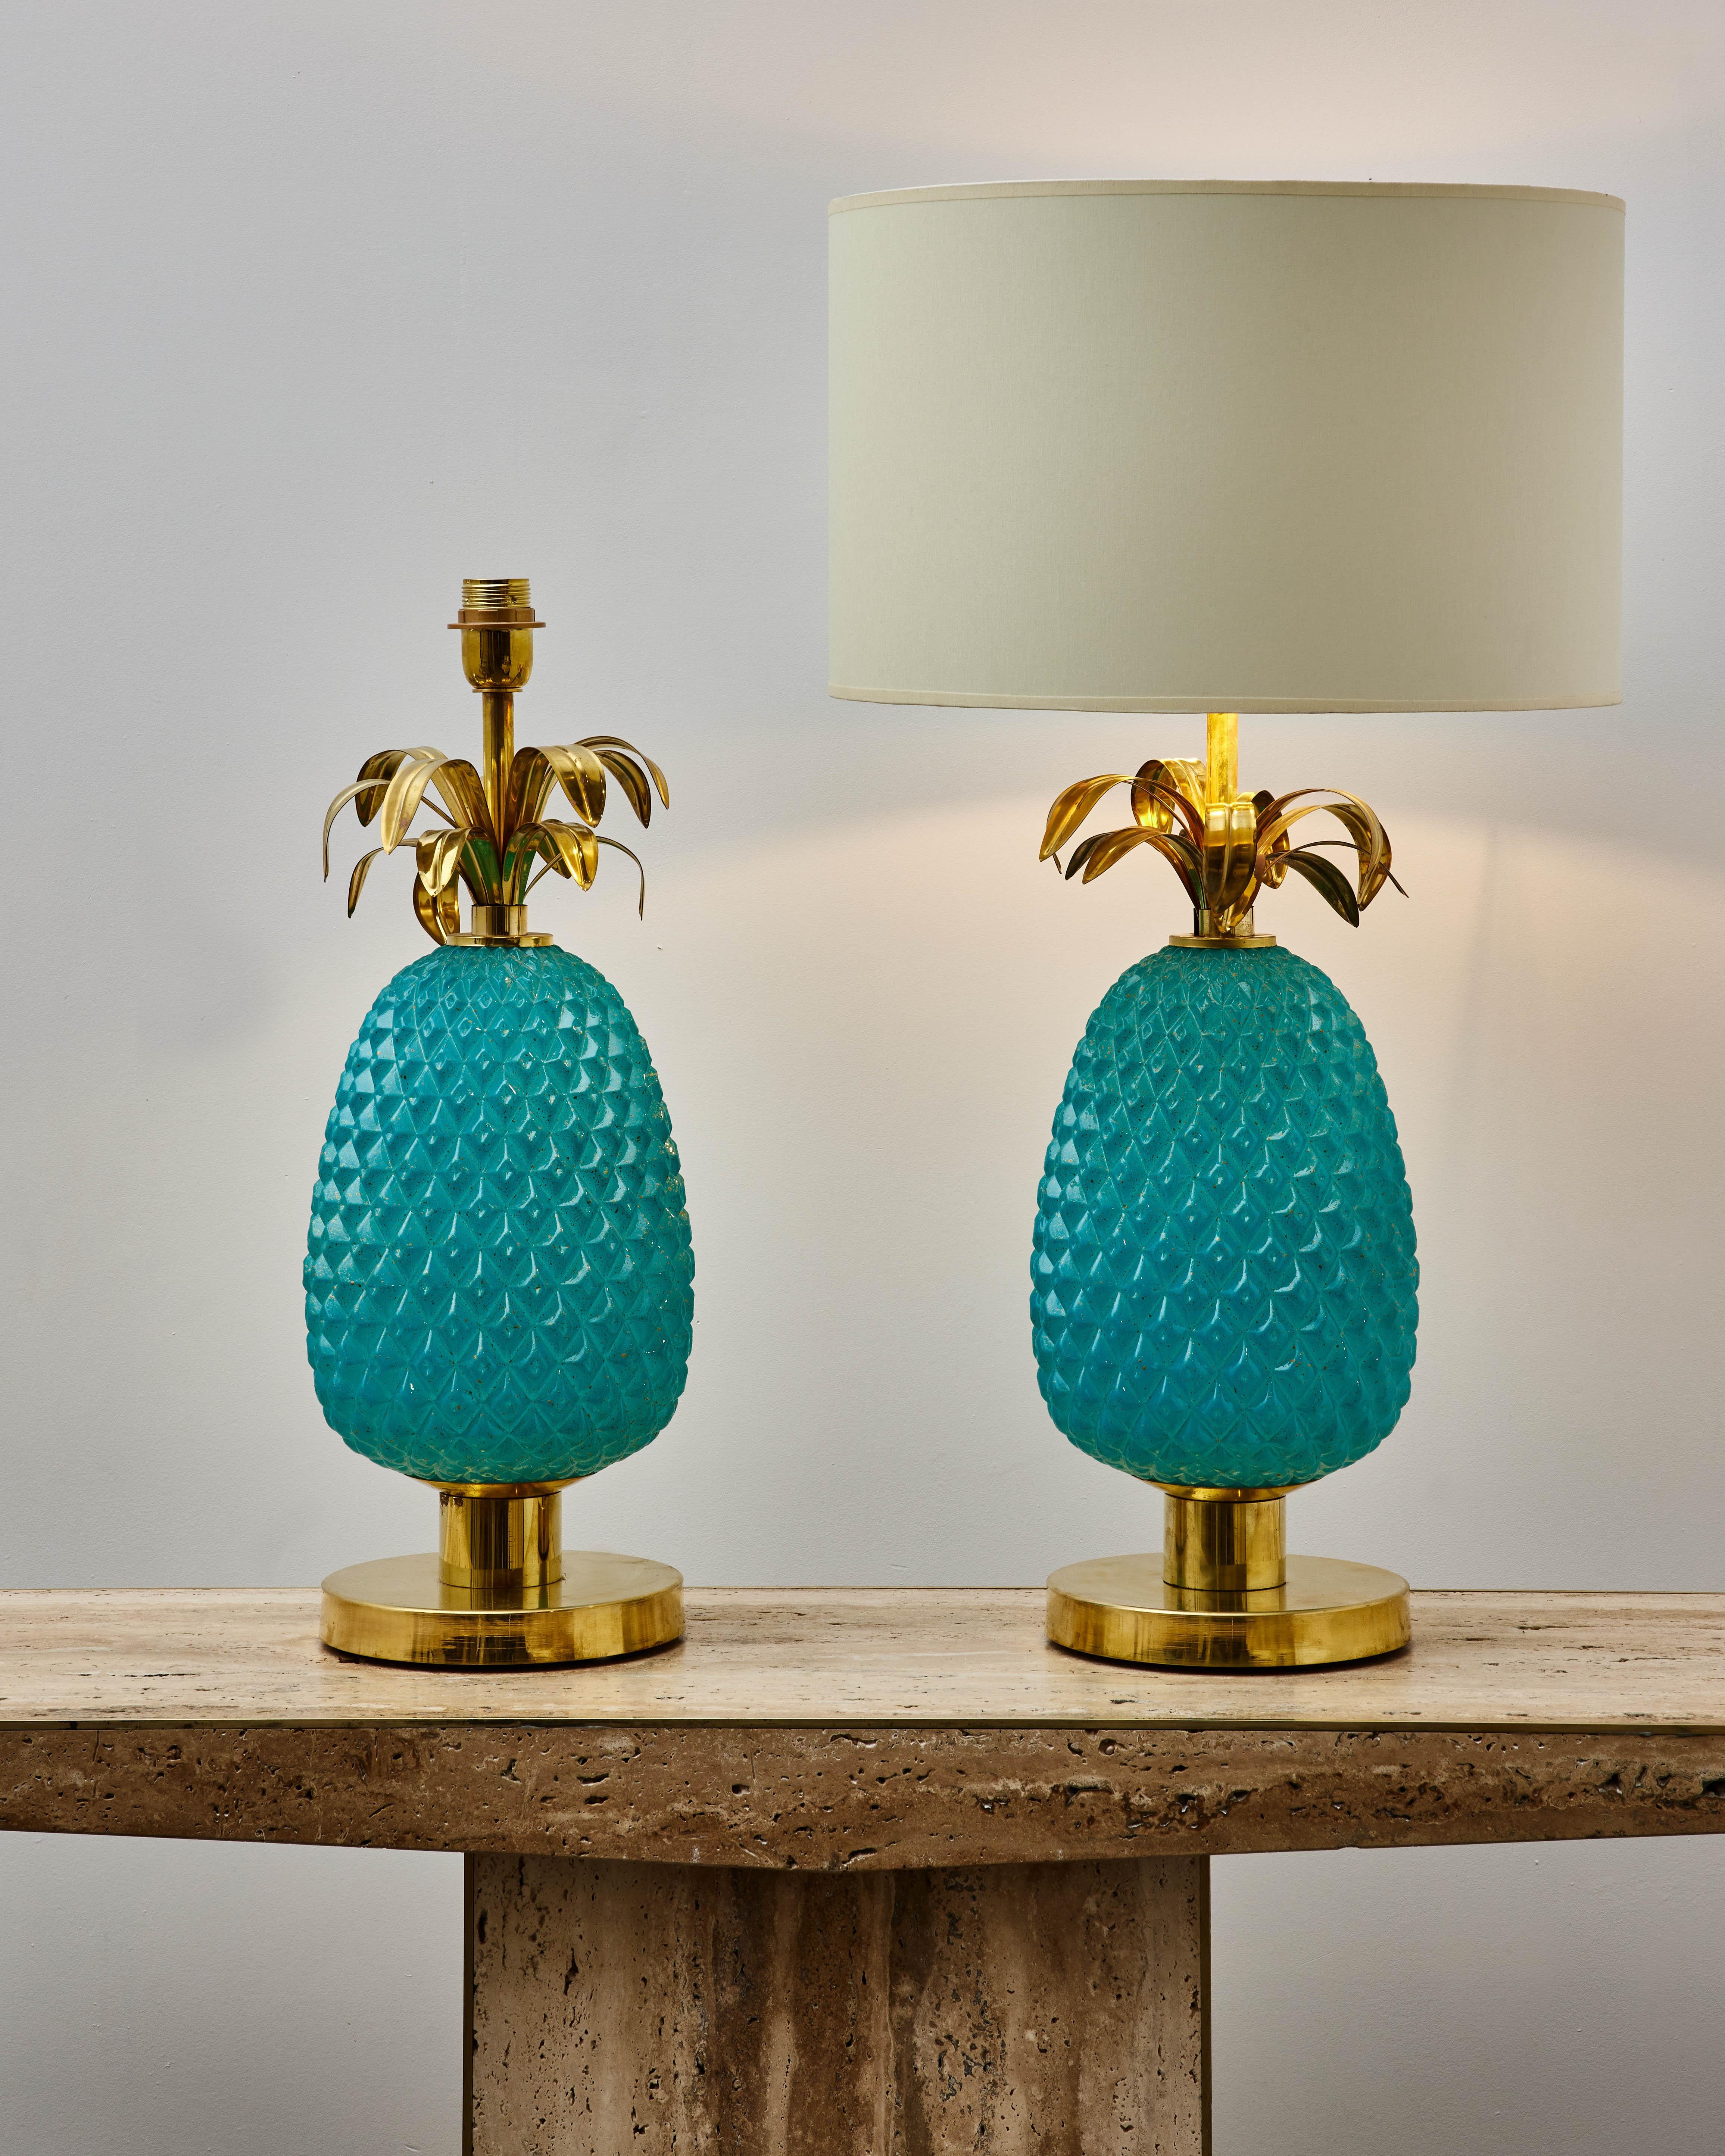 Pair of vintage table lamps in brass, sculpted and tainted Murano glass.
Italy, 1970s.

(Price and dimensions without shade)